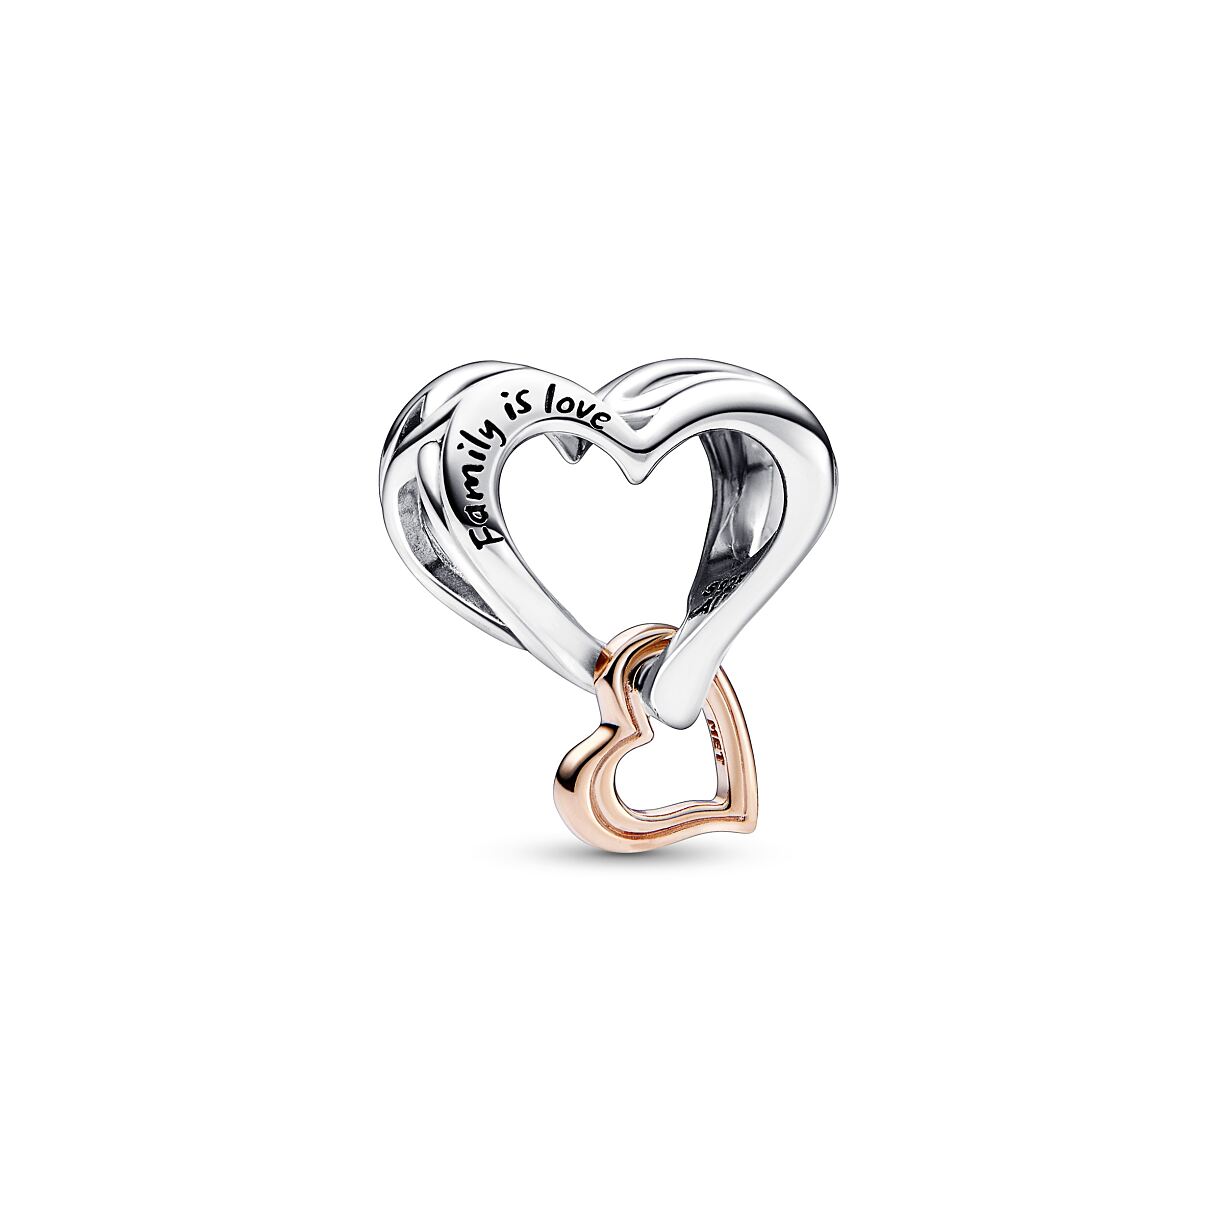 Pandora_Charm_Sterling silver_14k Gold plated_782642C00 (1)